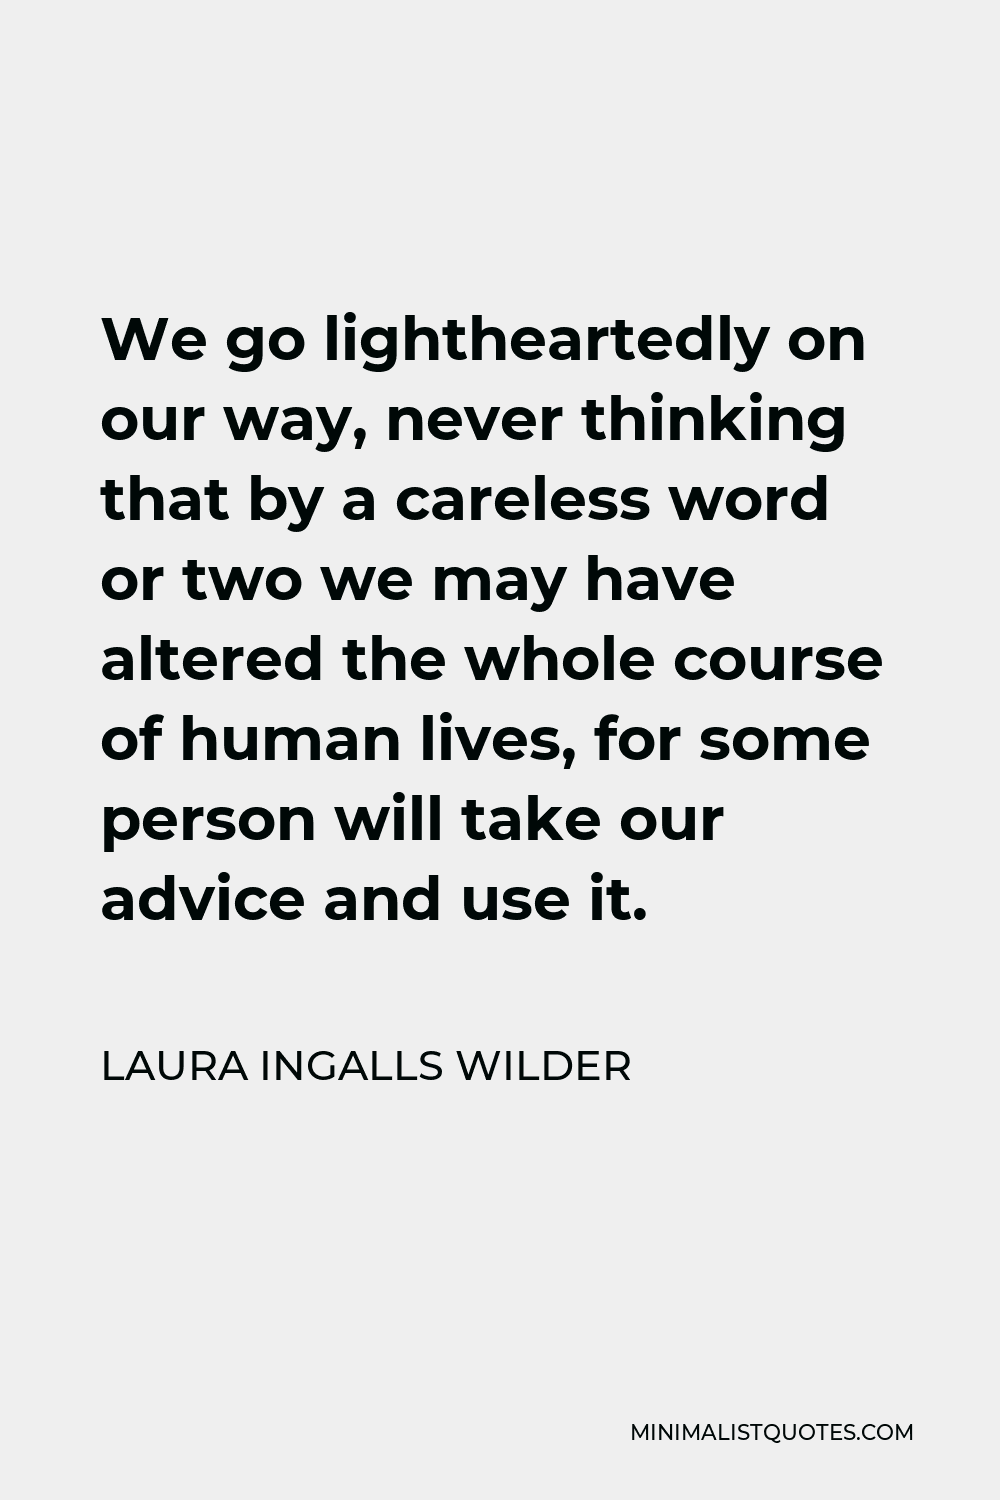 Laura Ingalls Wilder Quote - We go lightheartedly on our way, never thinking that by a careless word or two we may have altered the whole course of human lives, for some person will take our advice and use it.